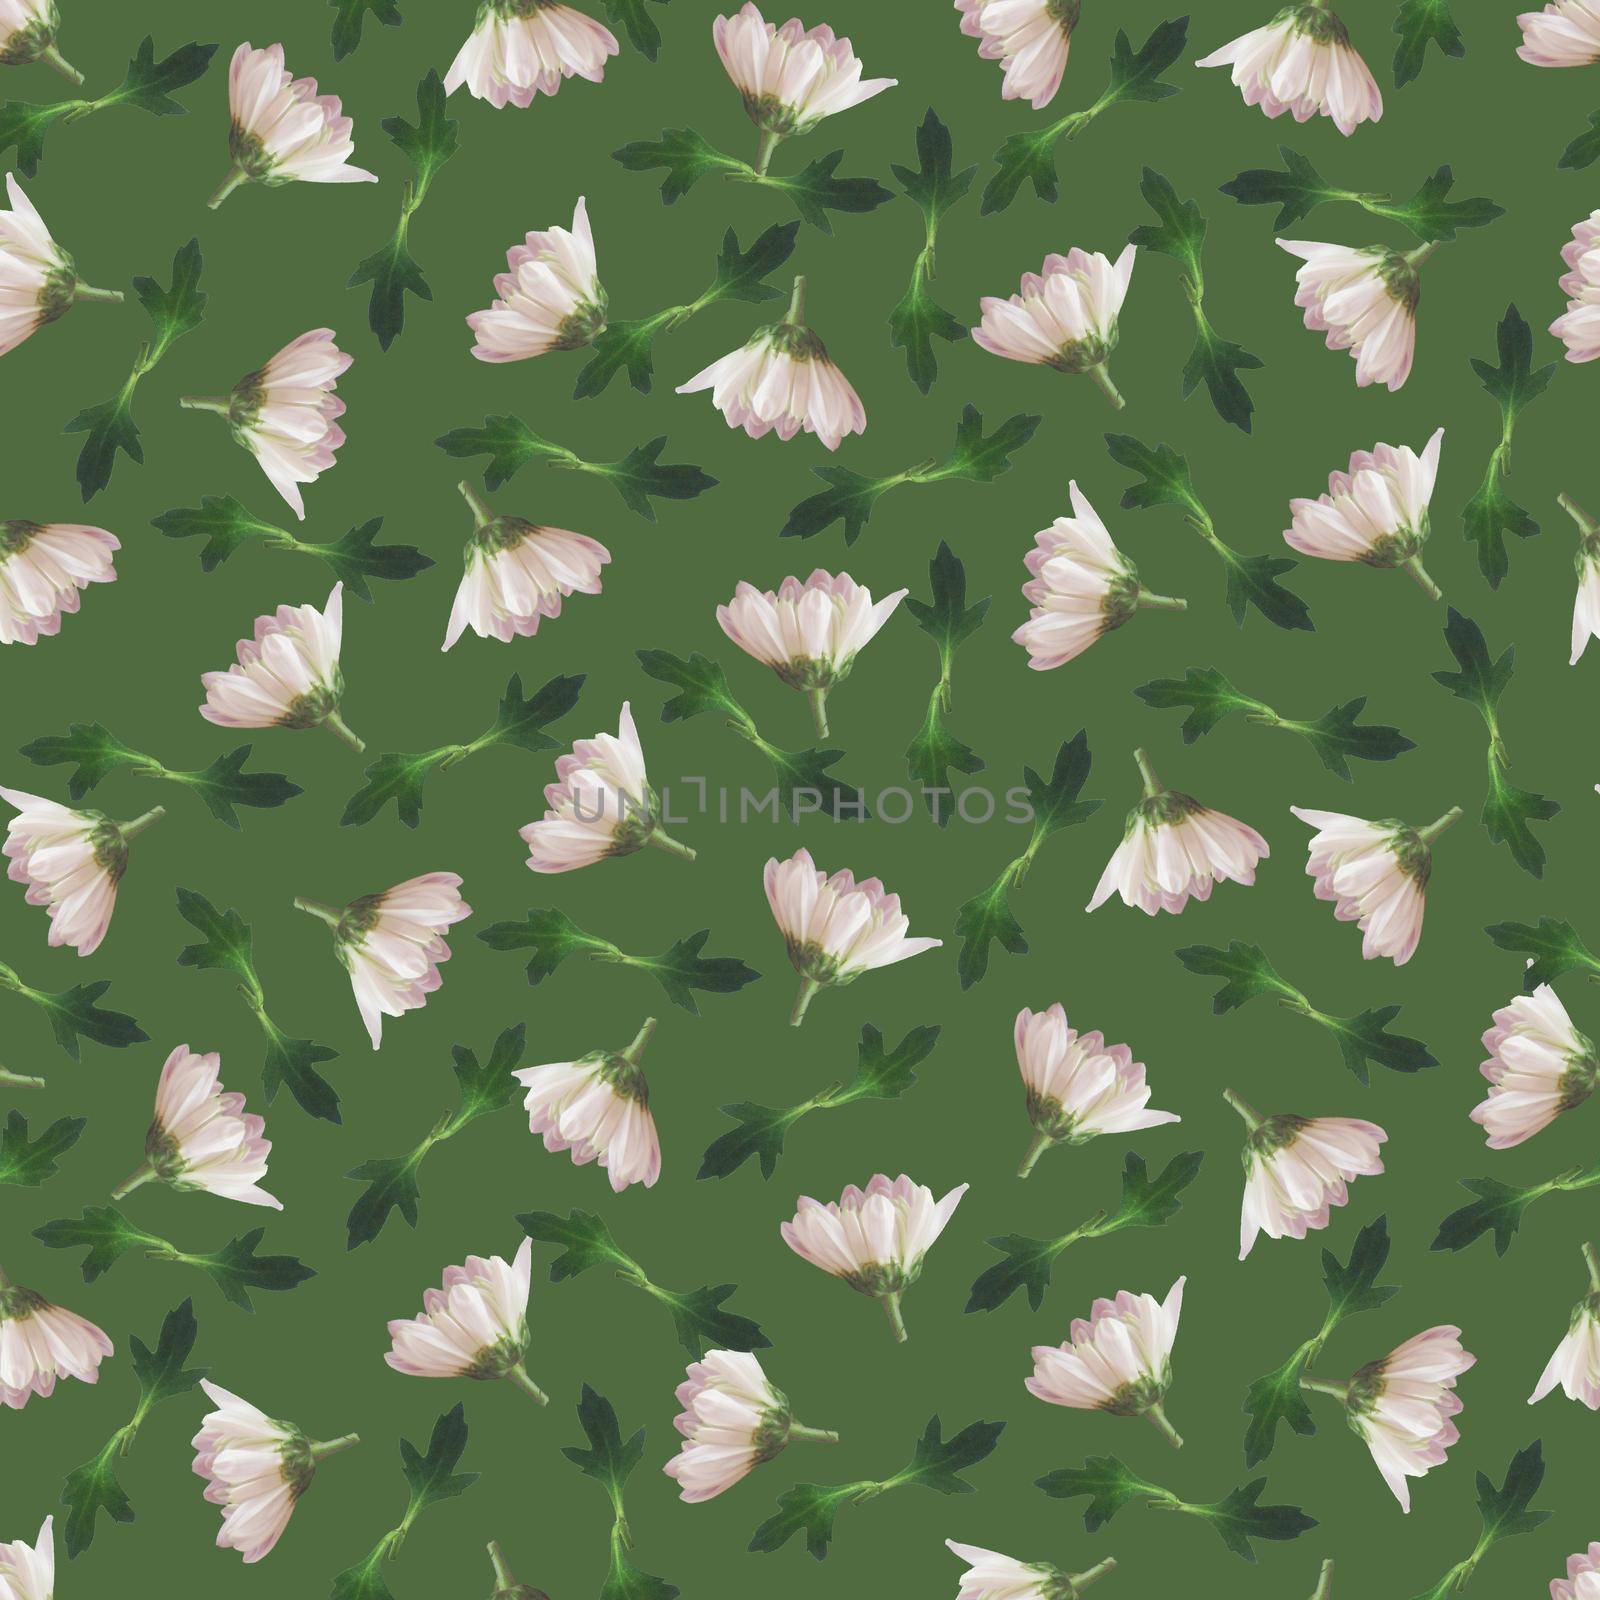 Photo and Digital Seamless Pattern with Nature Chrysanthemums Flowers. Digital Mixed Media Artwork. Endless Motif for Textile Decor and Design.